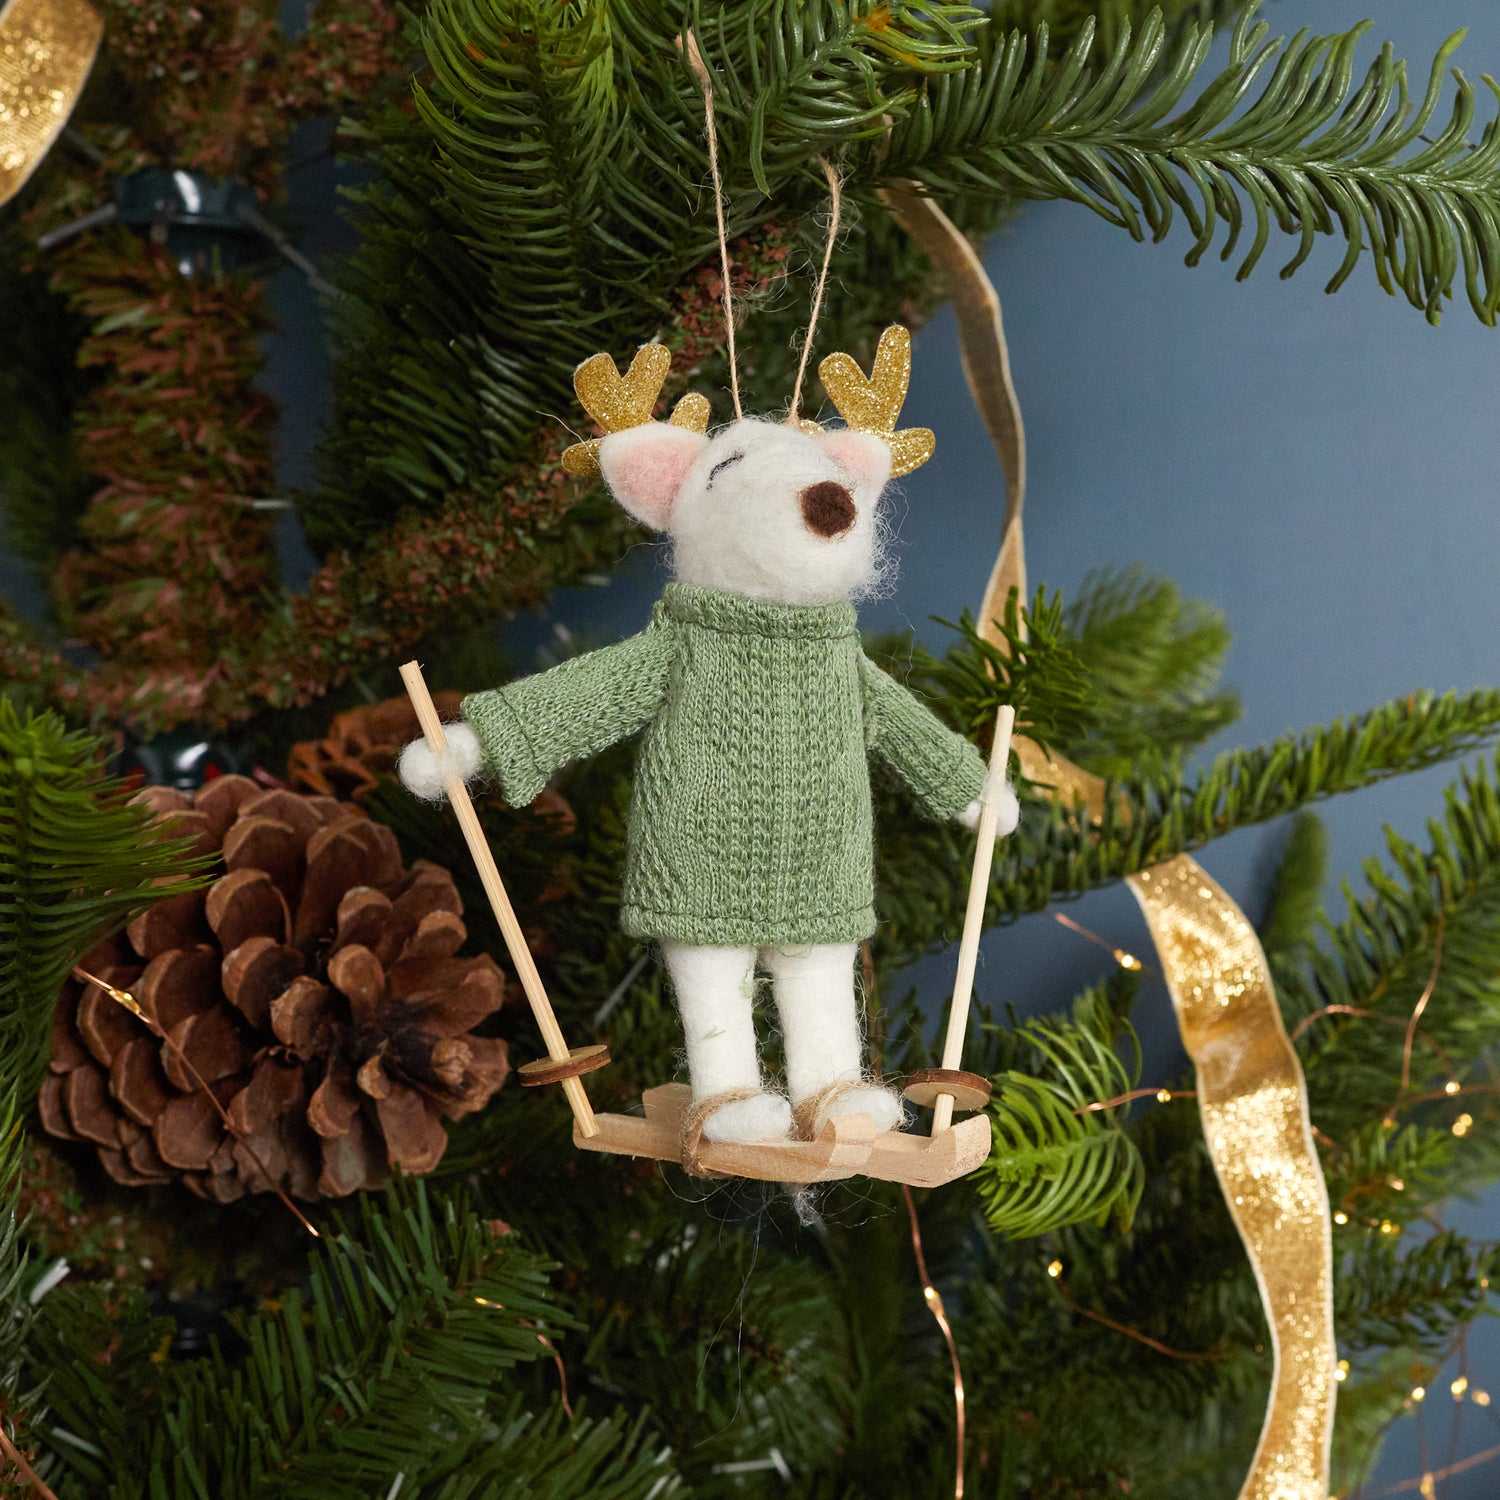 Felt Snow Deer Skier Ornament, Green Cable Knit Sweater